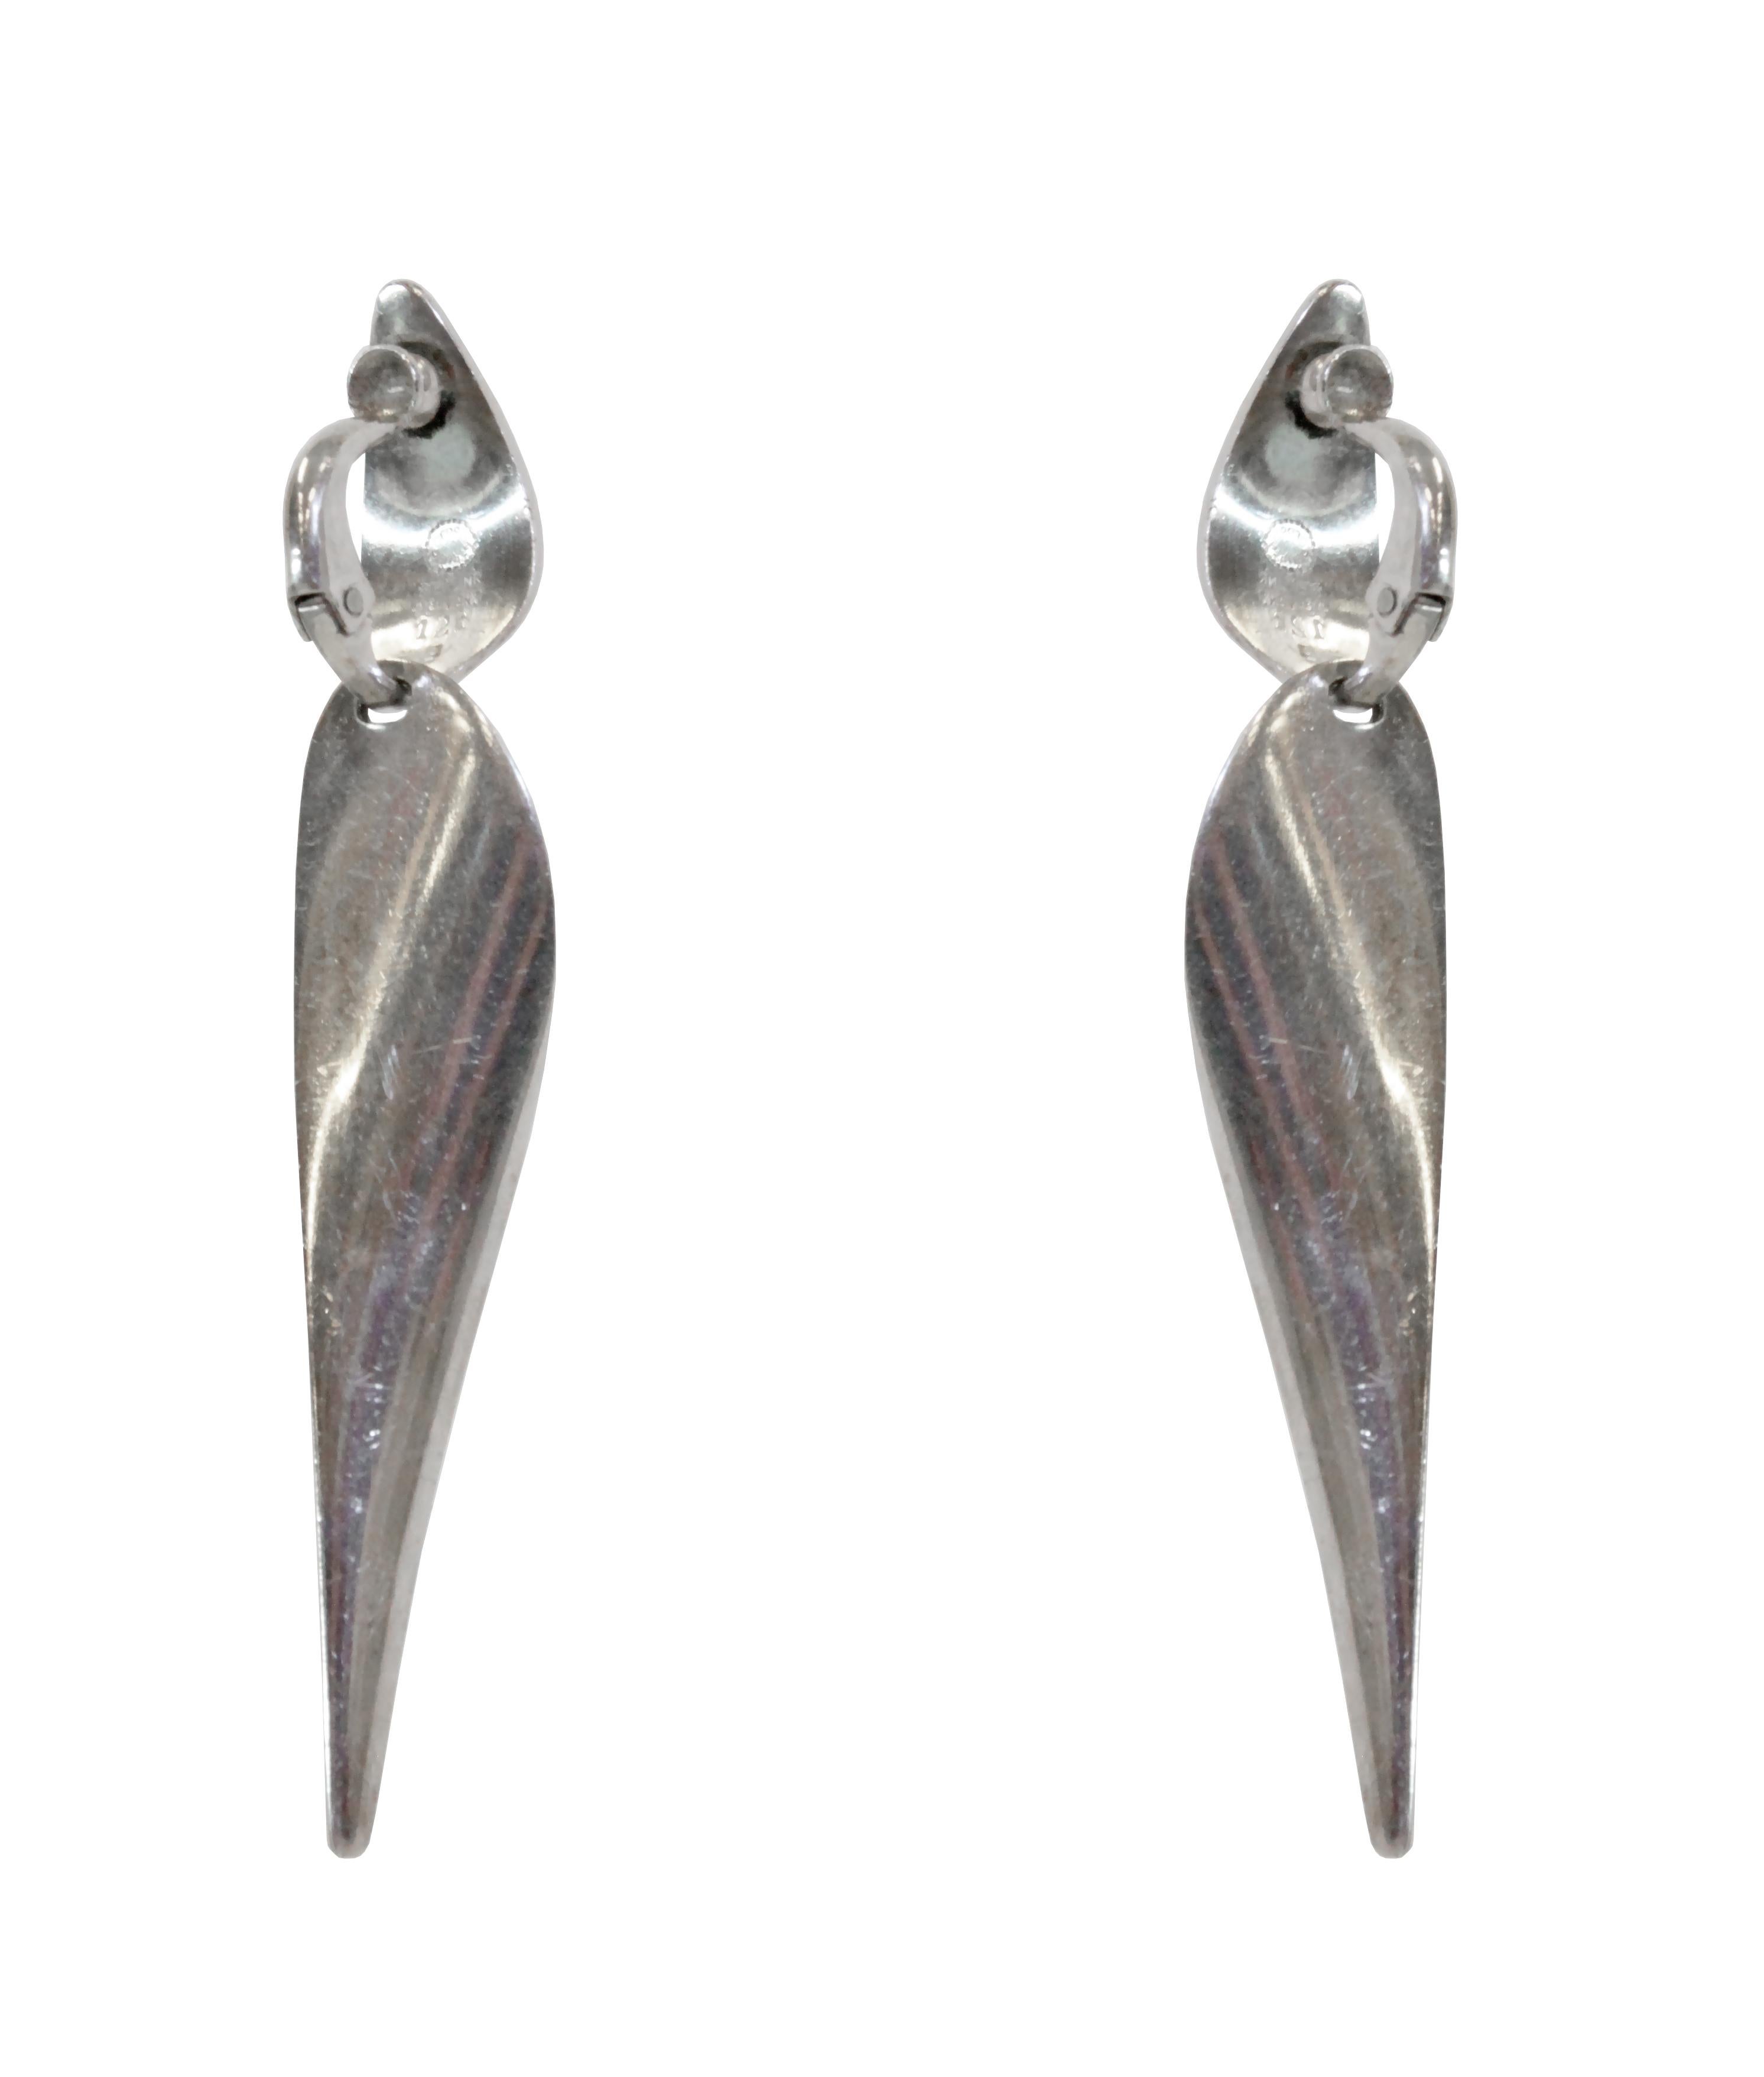 Wonderful and organic earrings in silver designed by Nanna Ditzel for Georg Jensen from ca 1970s first half. The earrings are in very good vintage condition. 